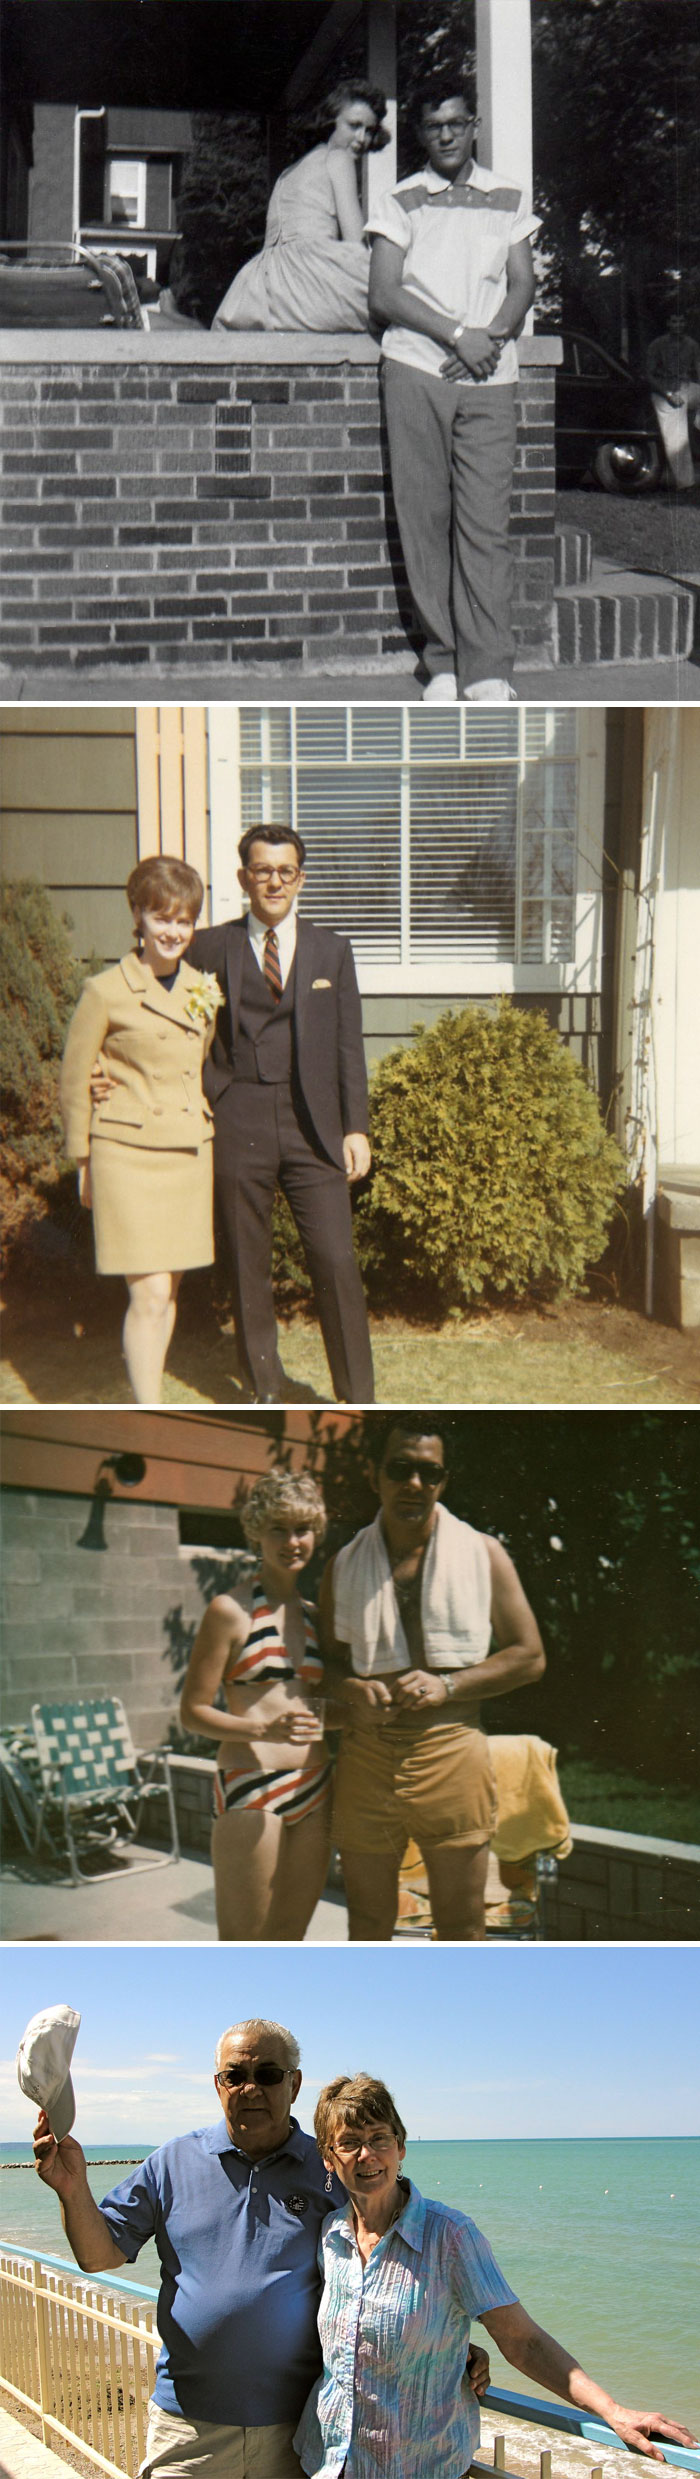 My Grandparents In The 50s, 60s, 70s, And Today